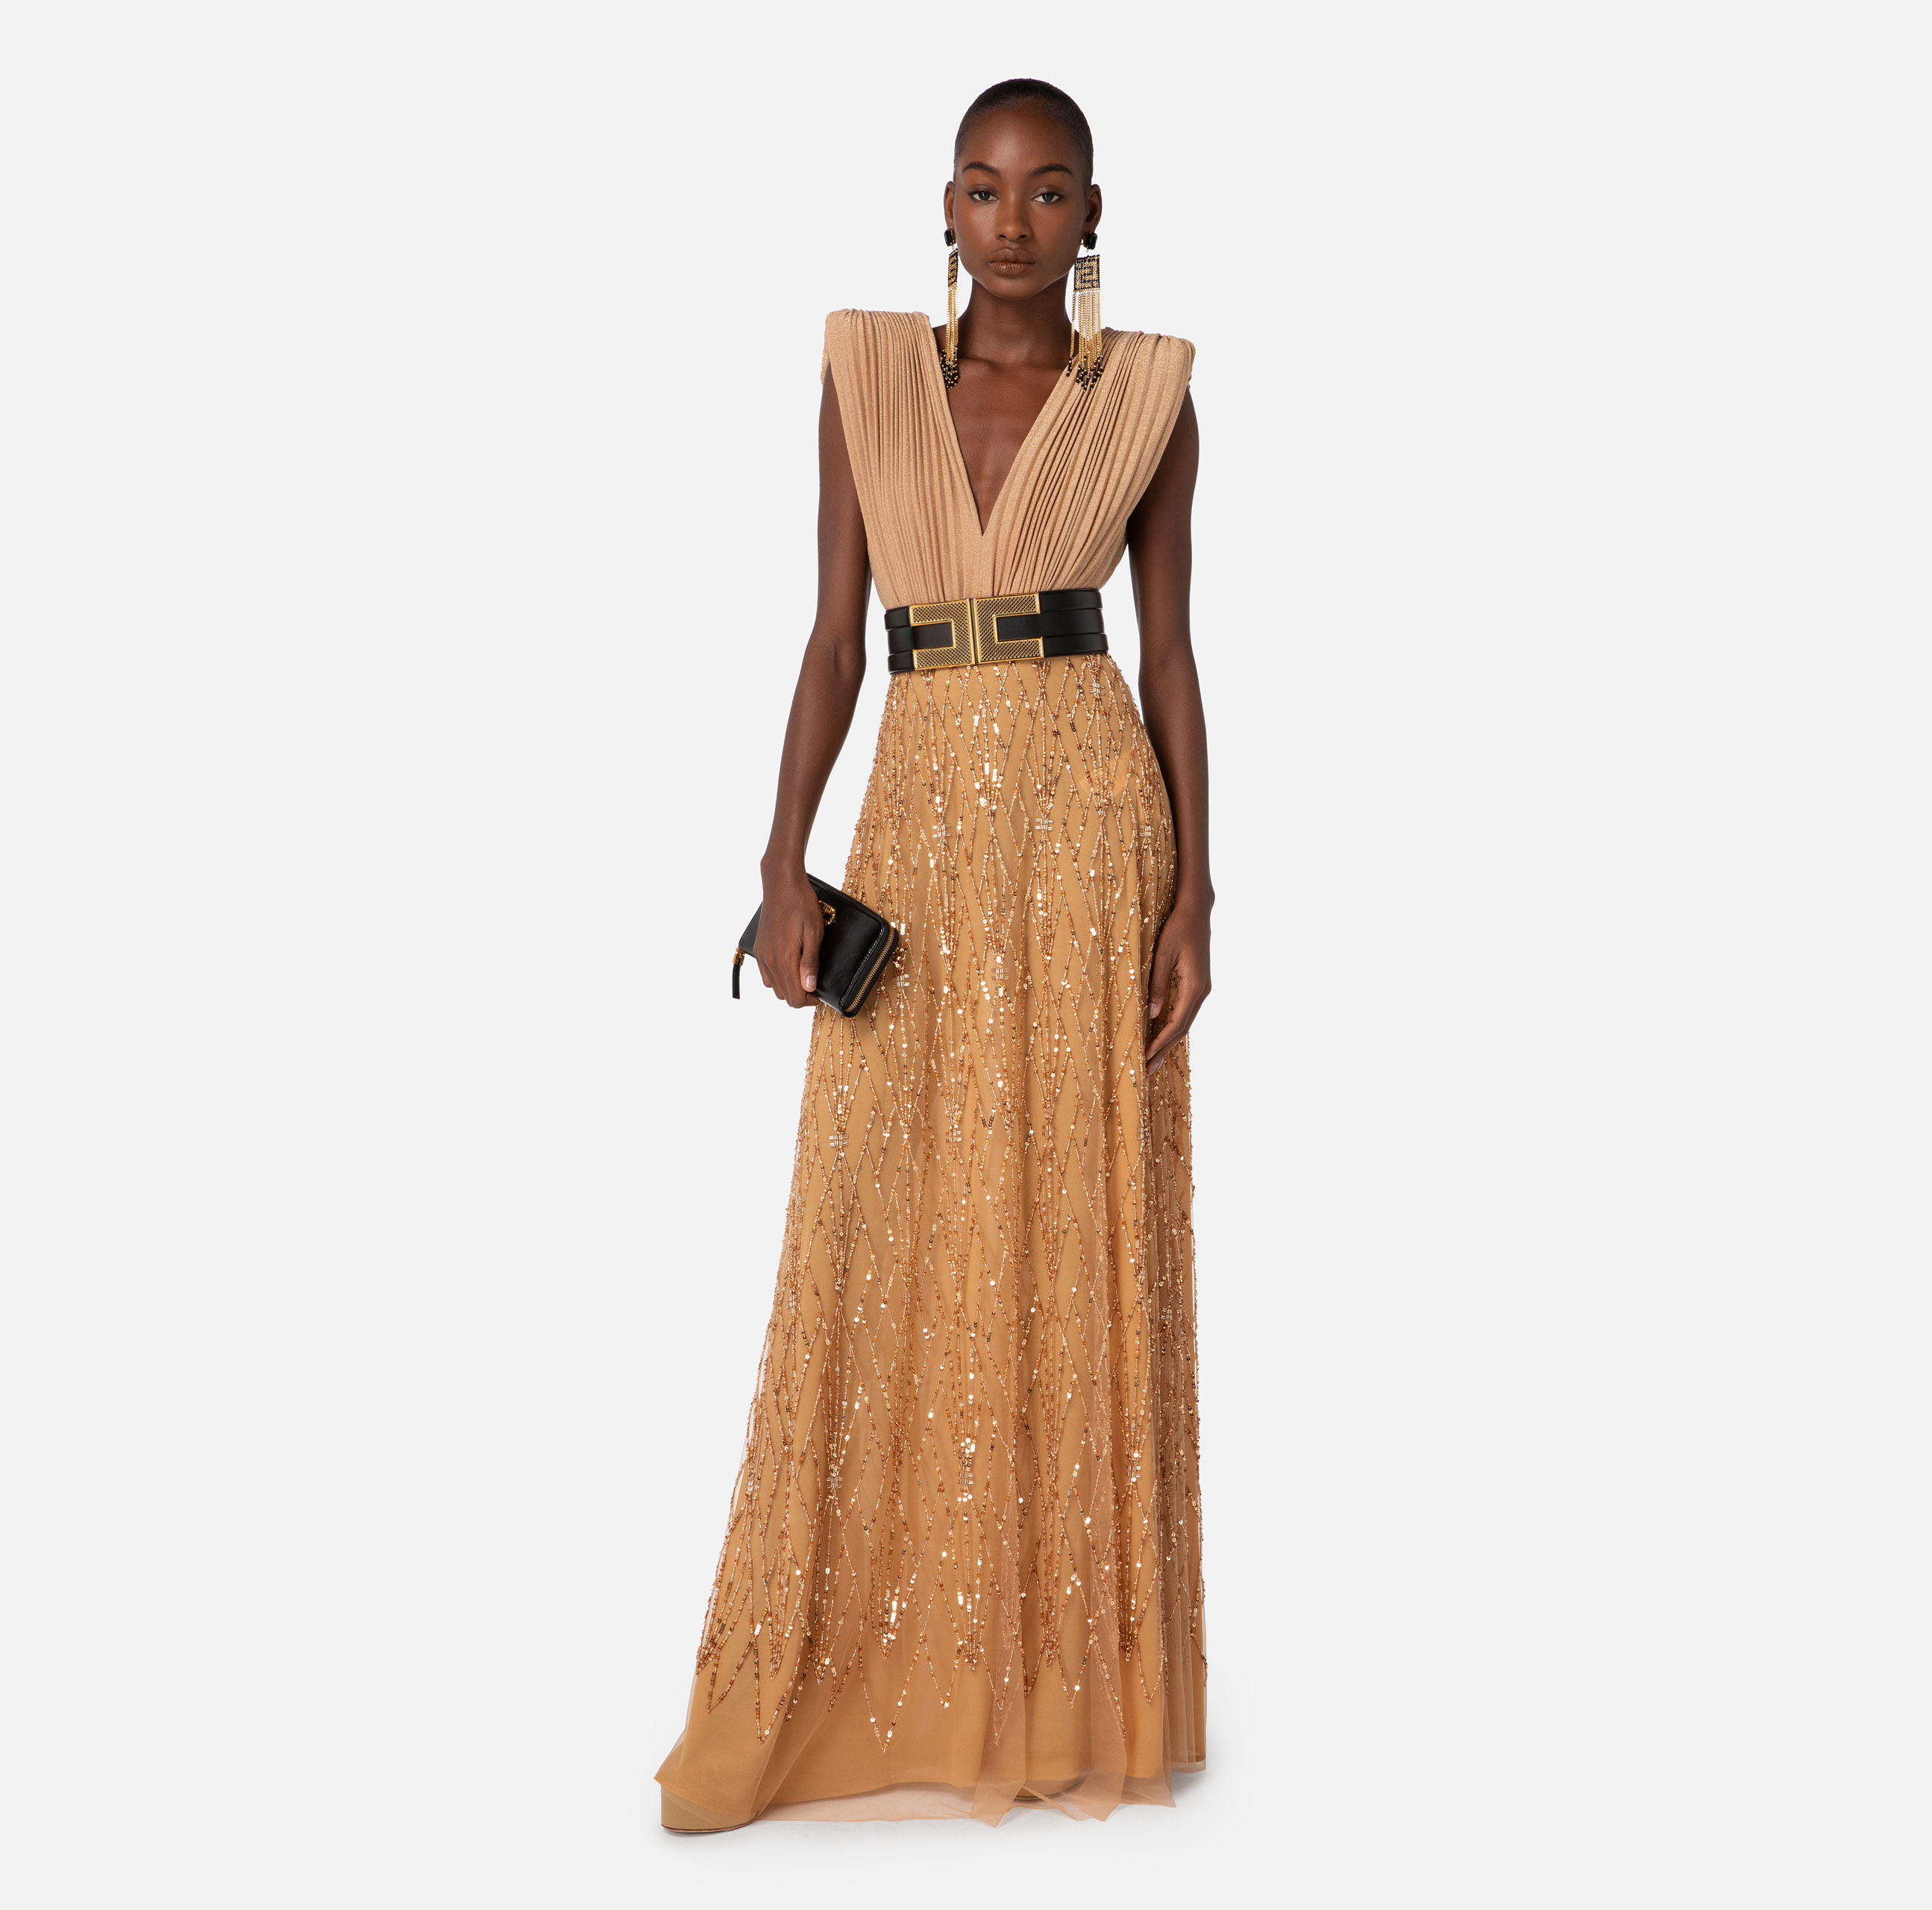 Red Carpet dress in jersey with diamond embroidery - Elisabetta Franchi